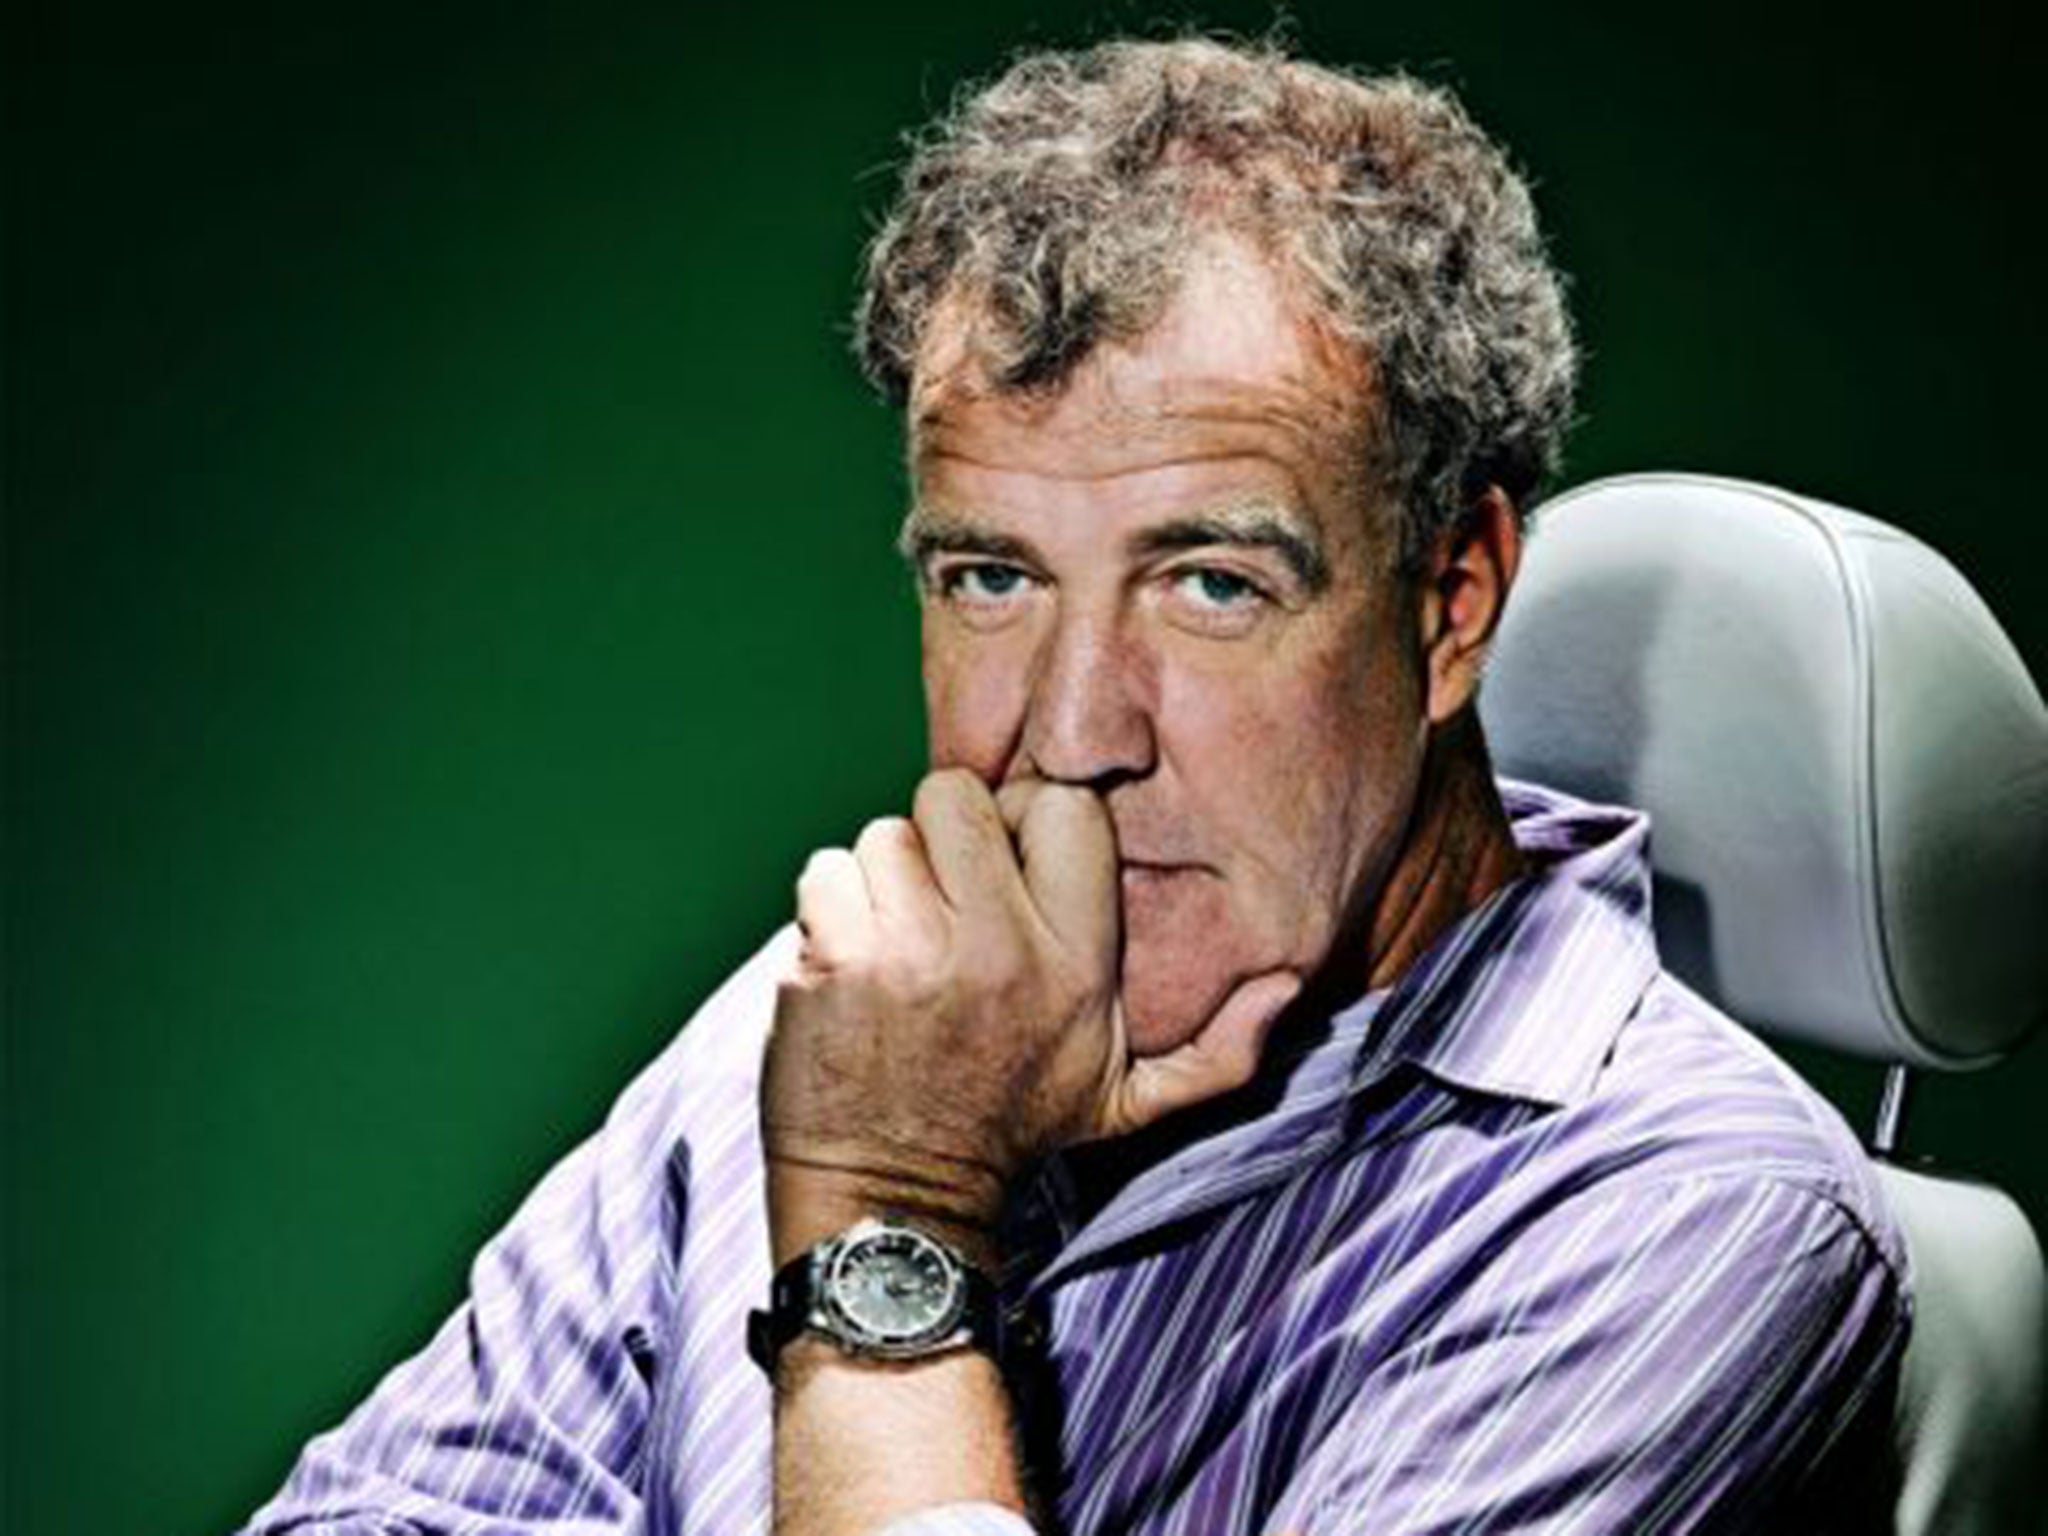 This is not the first time Jeremy Clarkson has courted controversy (BBC)